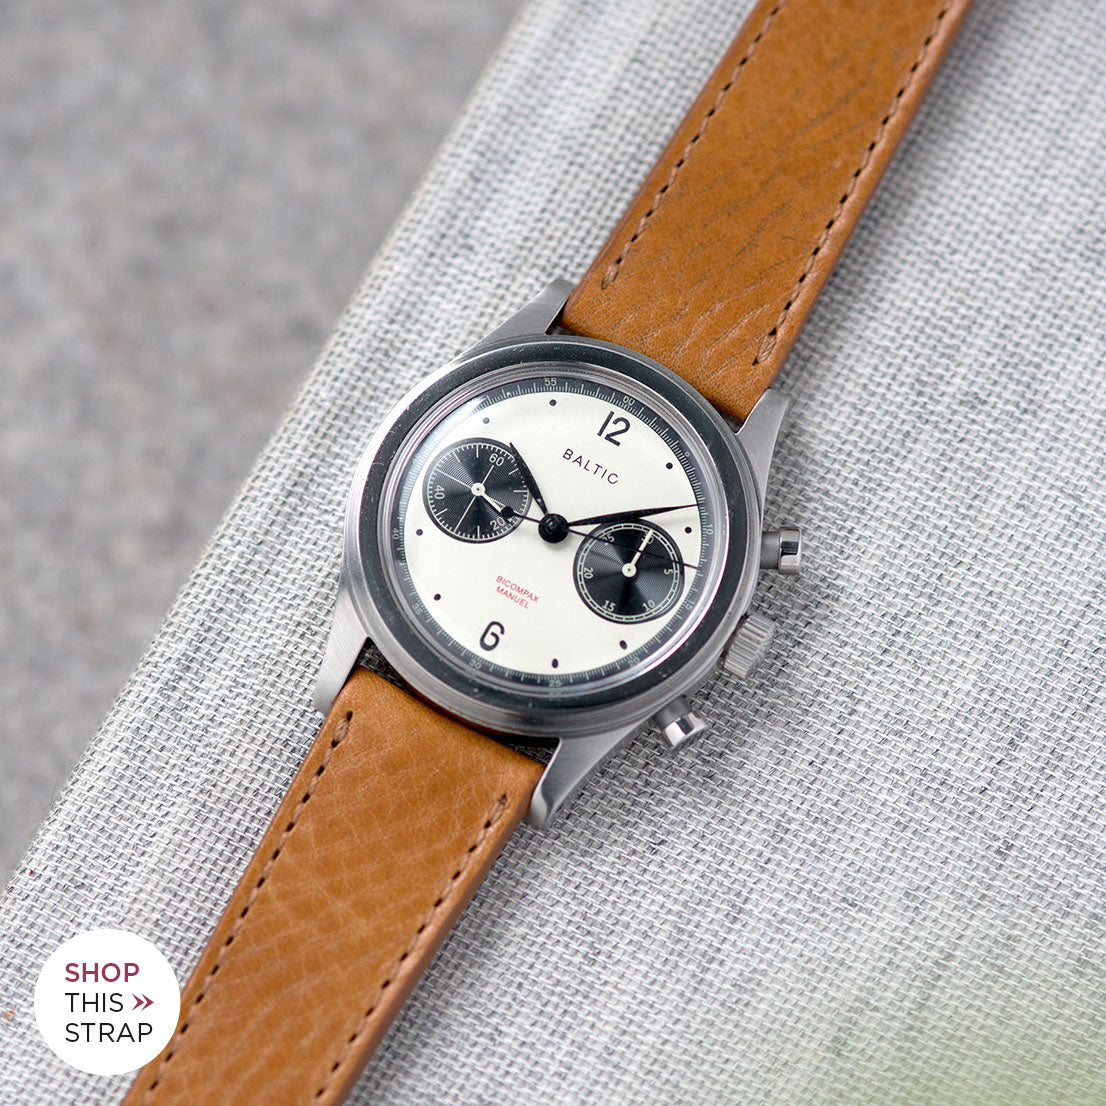 Bulang and Sons_Strap Guide_The Baltic-Chronograph-Panda-Limited-Edition_Gilt Brown Tonal Leather Watch Strap